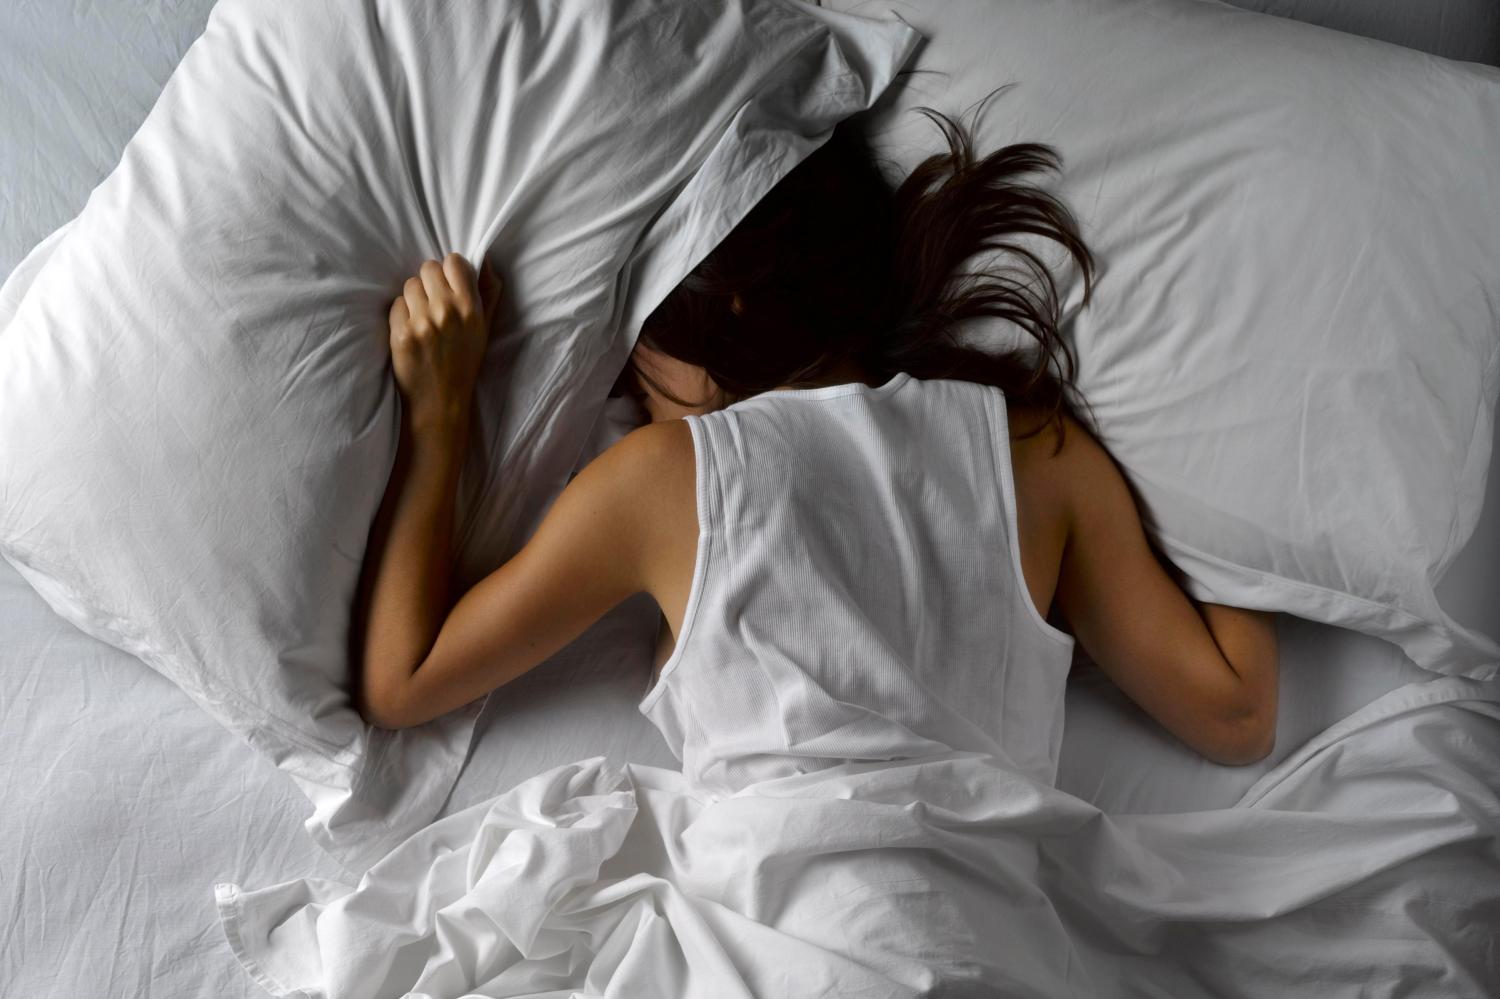 Kicking and shouting in your sleep could be early warning sign of ...